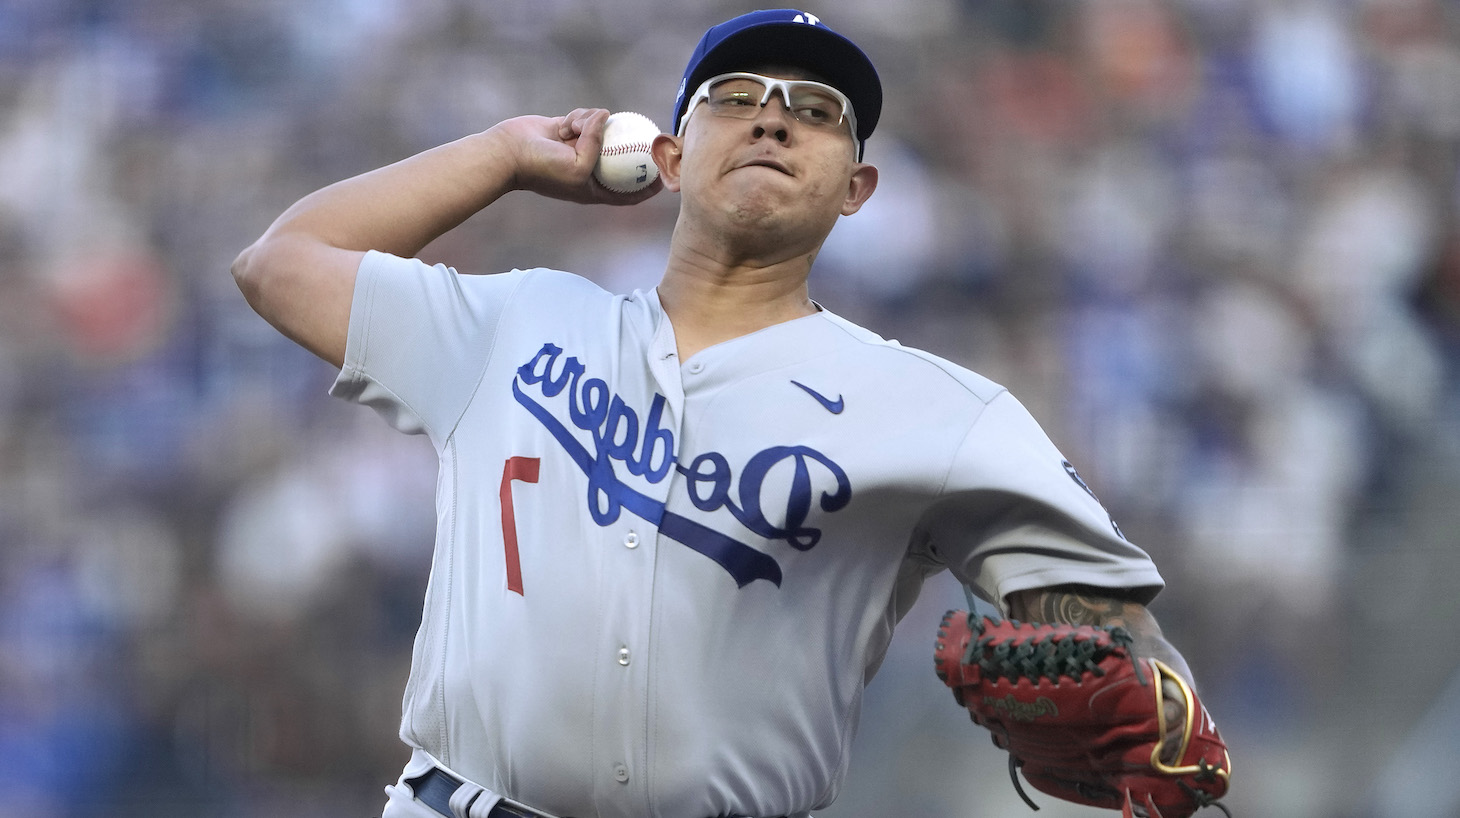 SAN FRANCISCO, CALIFORNIA - SEPTEMBER 04: Julio Urias #7 of the Los Angeles Dodgers pitches against the San Francisco Giants in the bottom of the first inning at Oracle Park on September 04, 2021 in San Francisco, California. (Photo by Thearon W. Henderson/Getty Images)